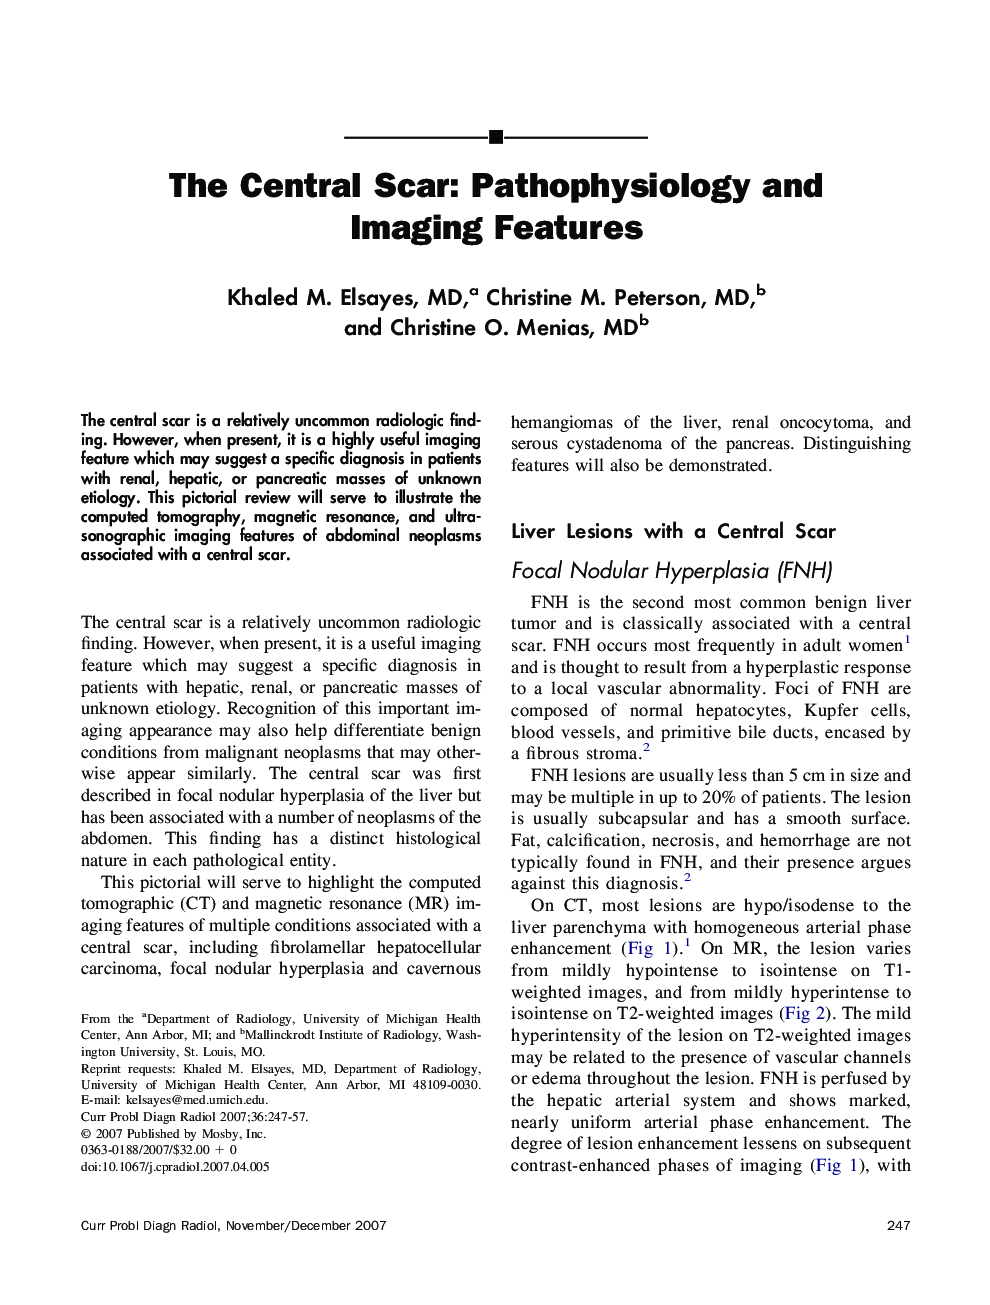 The Central Scar: Pathophysiology and Imaging Features